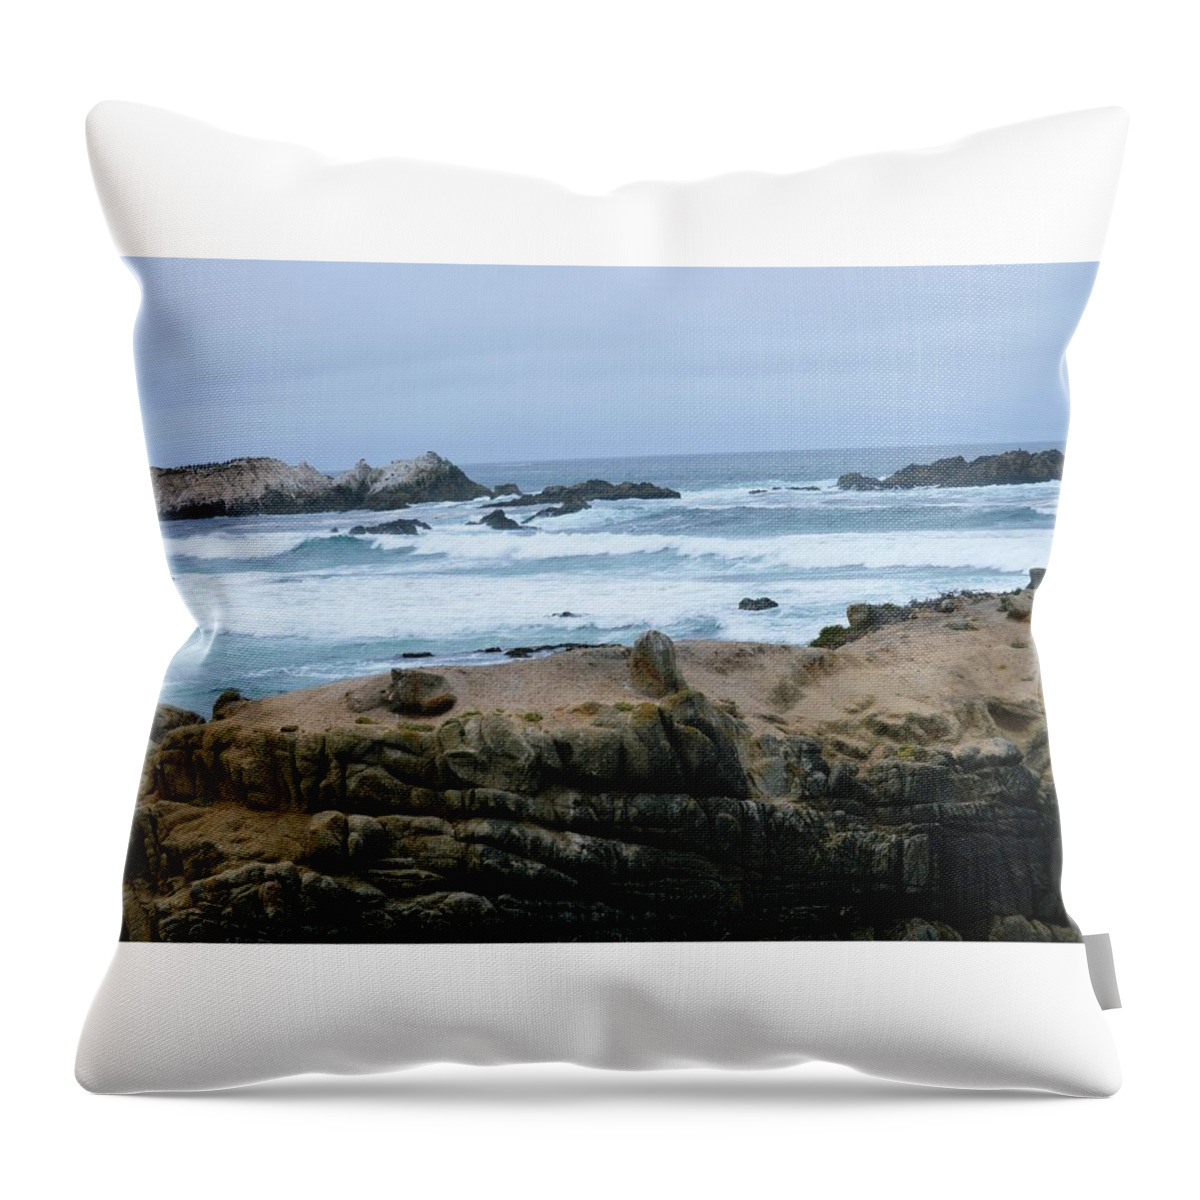 Landscape Throw Pillow featuring the photograph On The Rocks by Marian Jenkins